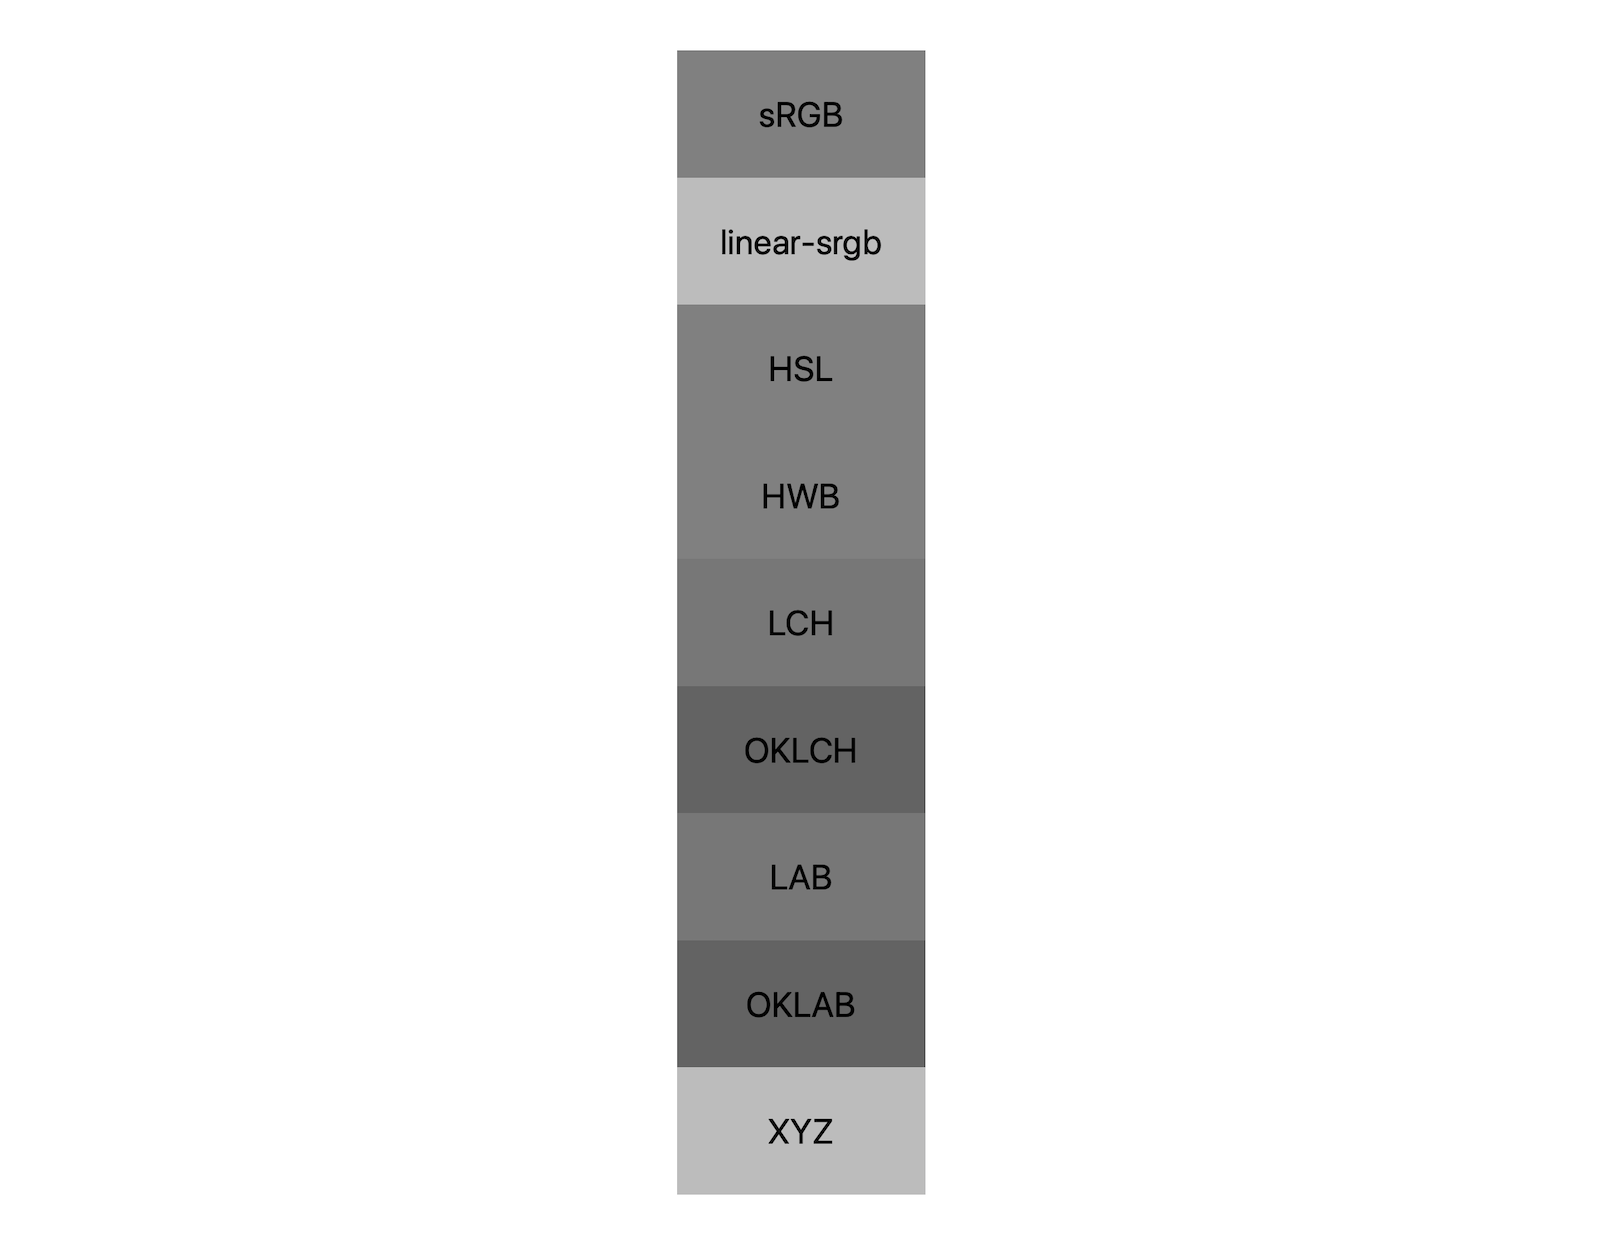 7 color spaces (srgb, linear-srgb, lch, oklch, lab, oklab, xyz) each show their results of mixing black and white. Roughly 5 different shades are shown, demonstrating that each color space will even mix to a gray differently.